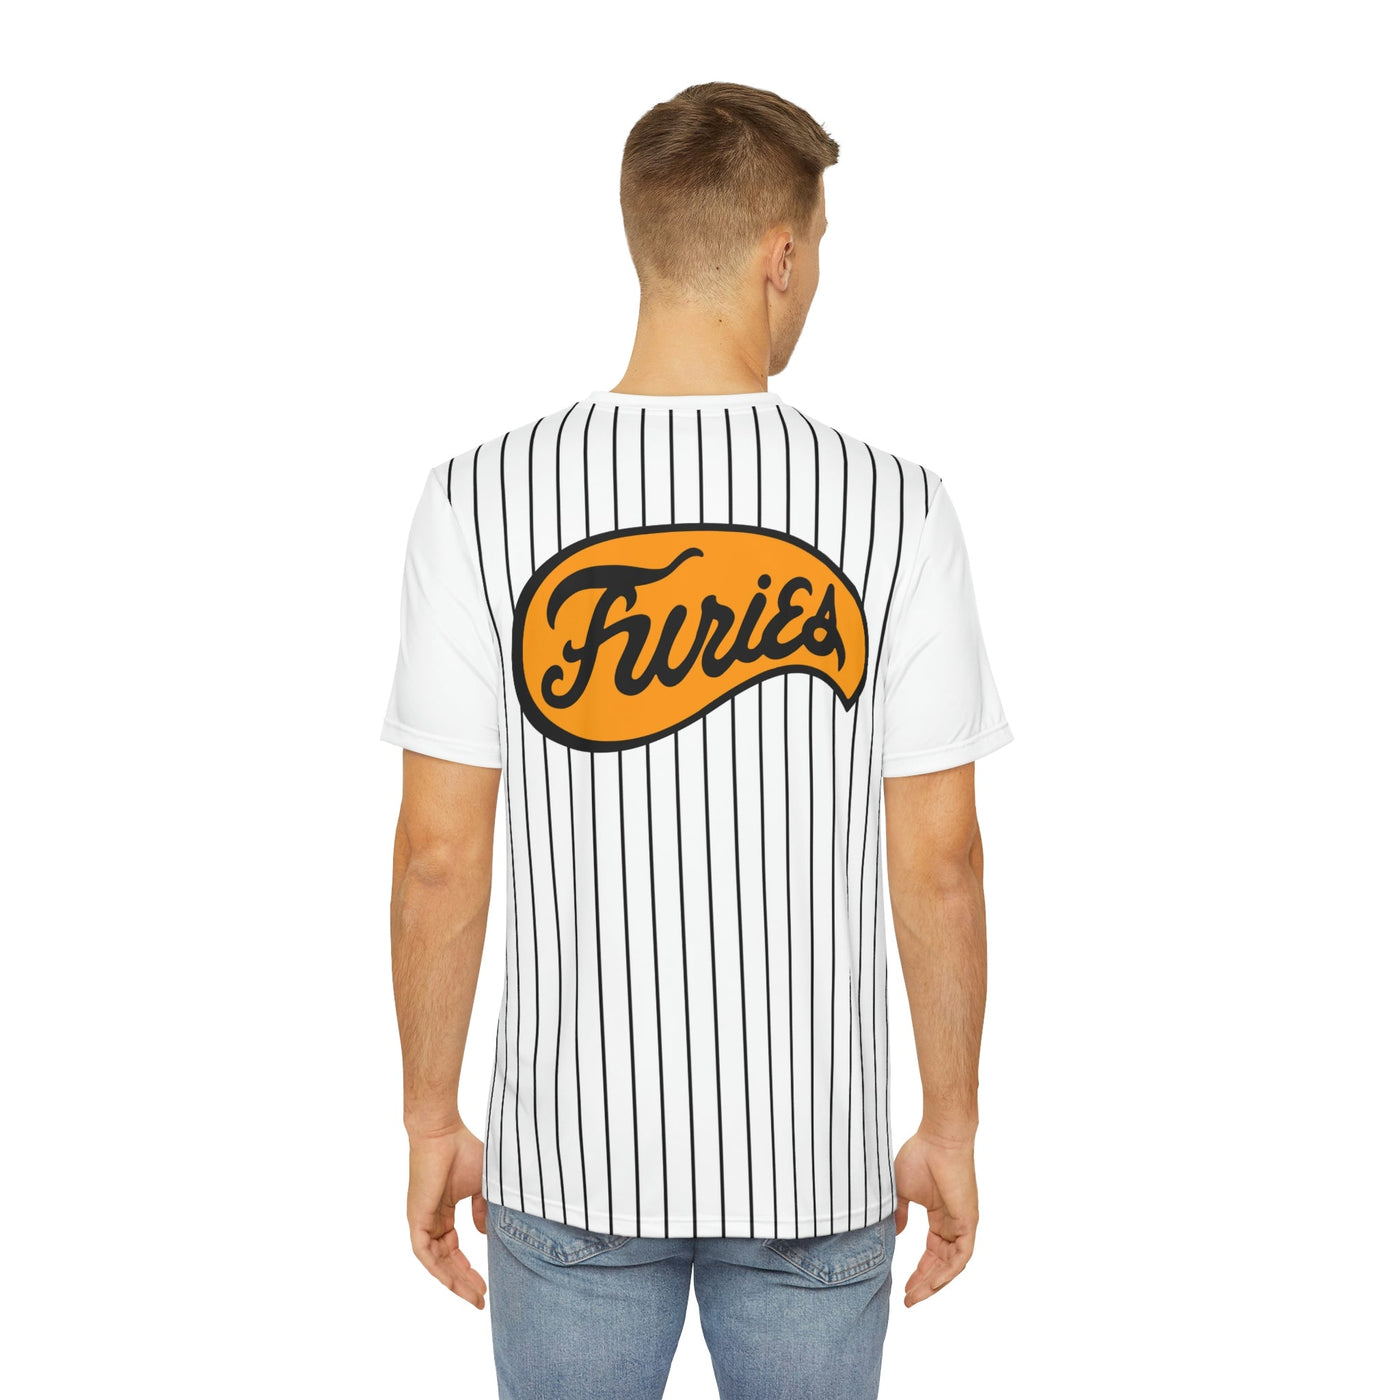 The Furies Striped T-Shirt - Iconic Gang from The Warriors Movie 1979